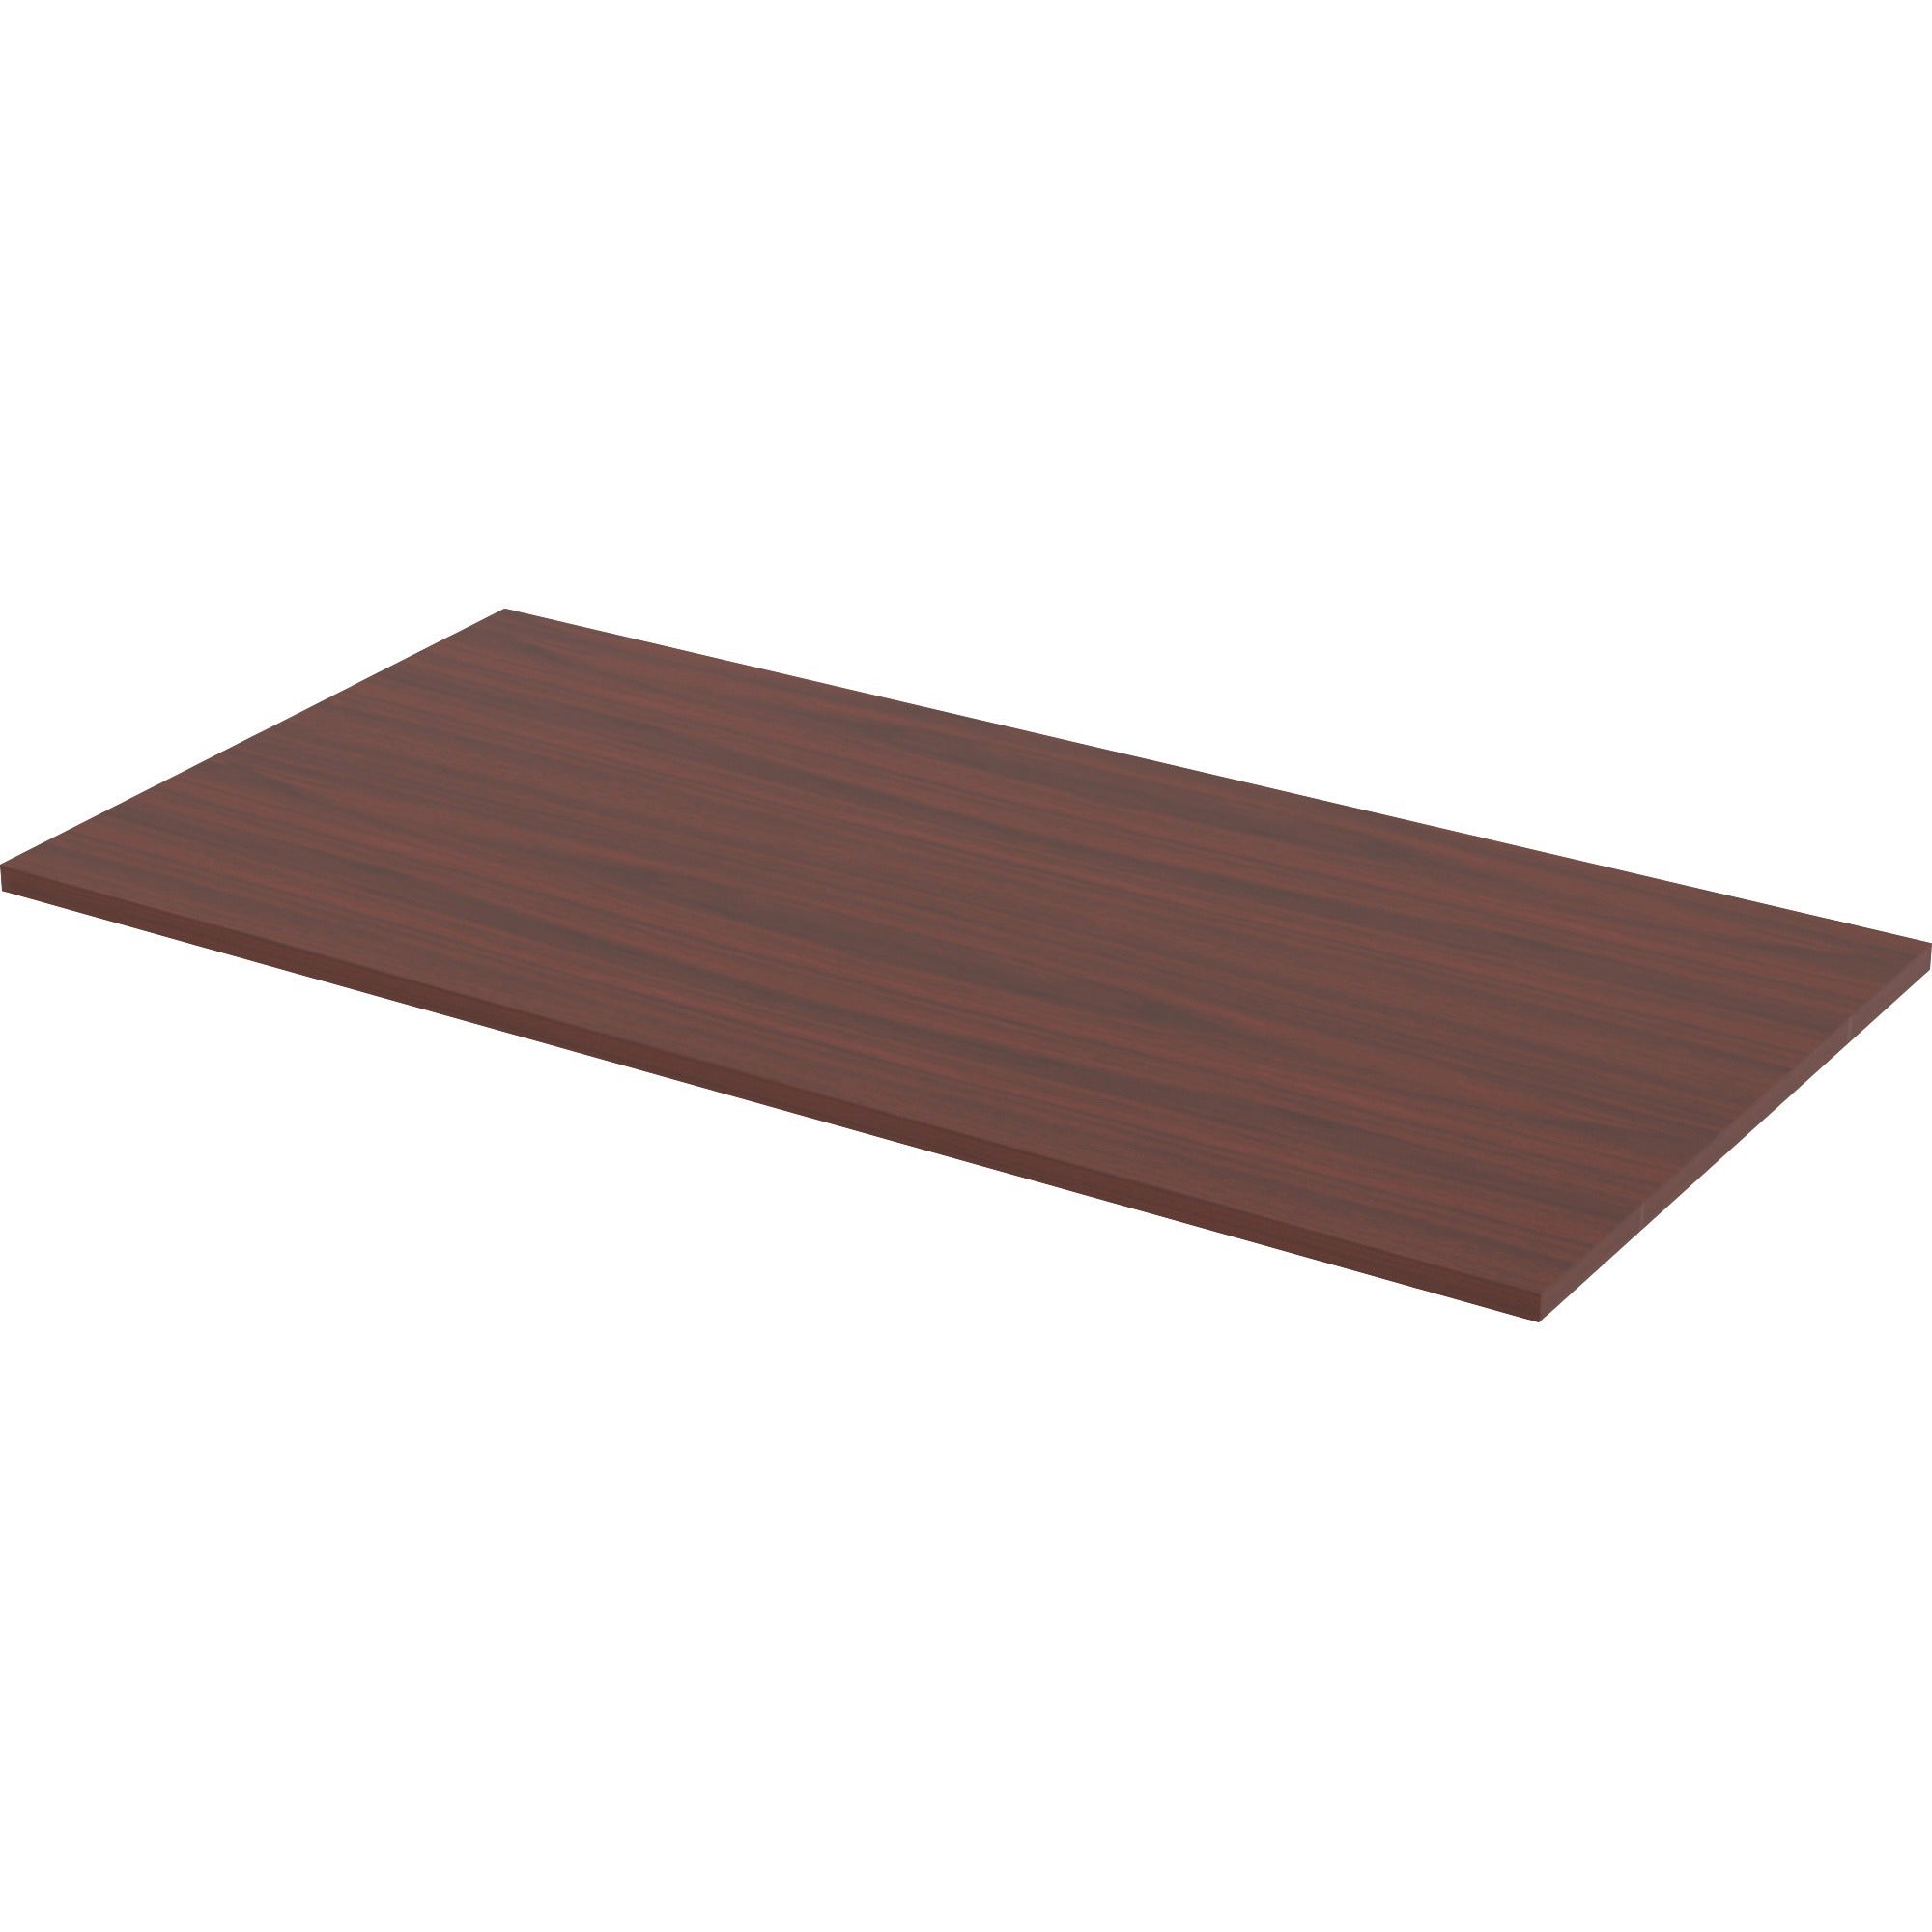 lorell-relevance-series-tabletop-599-x-295-x-1-table-top-straight-edge-finish-mahogany-laminate_llr16200 - 2